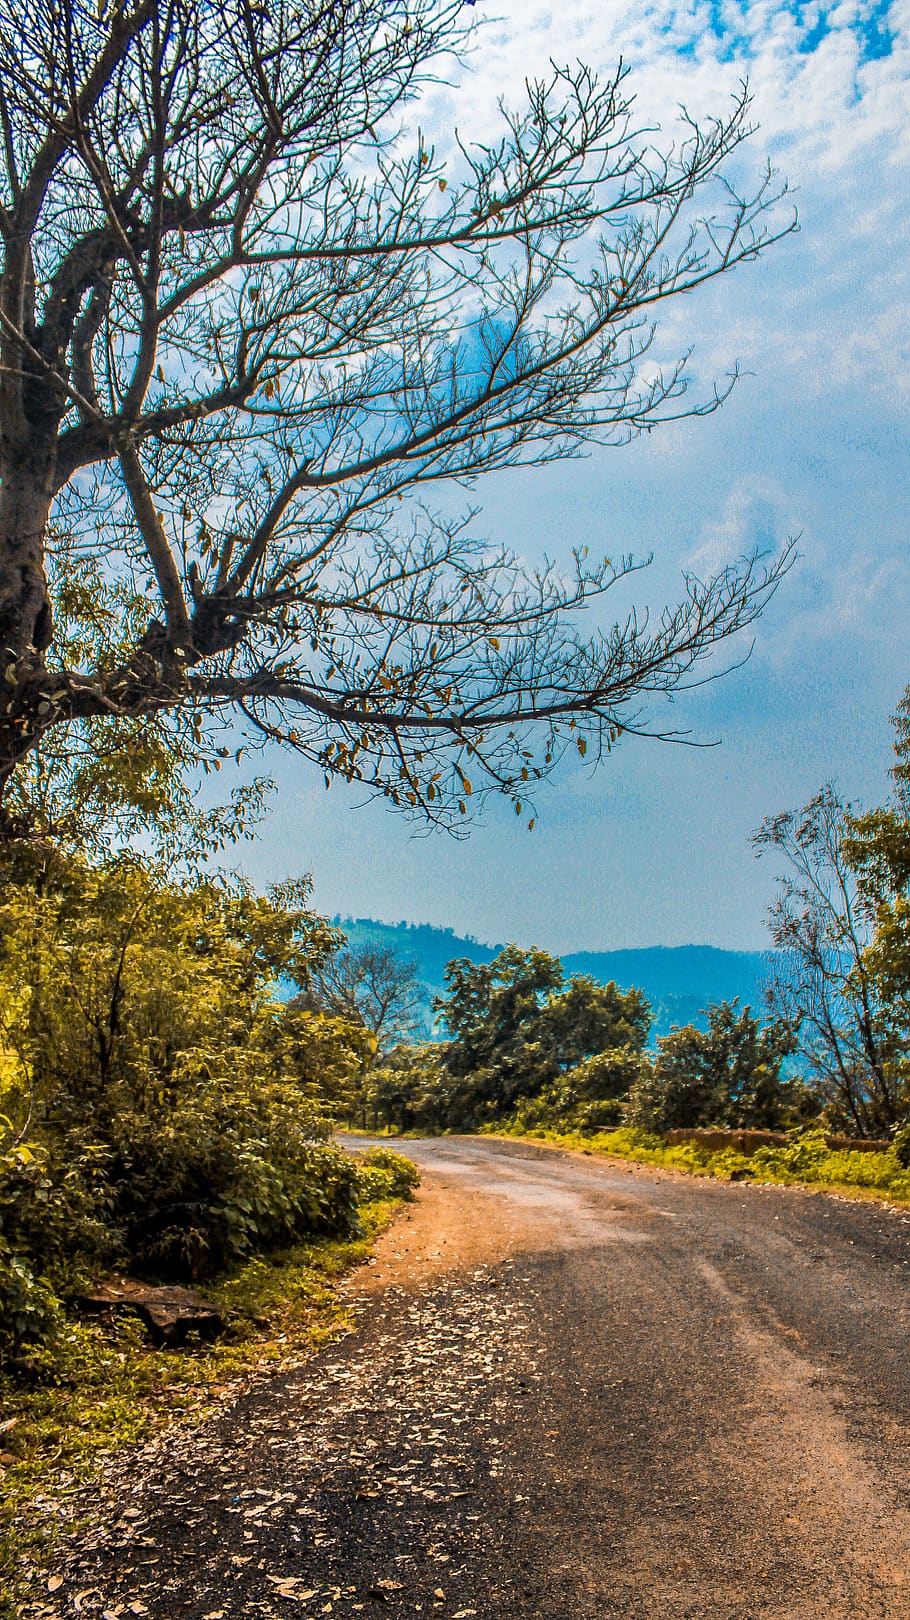 india, wilson hills (hill station), tress, leaves, roads, forest